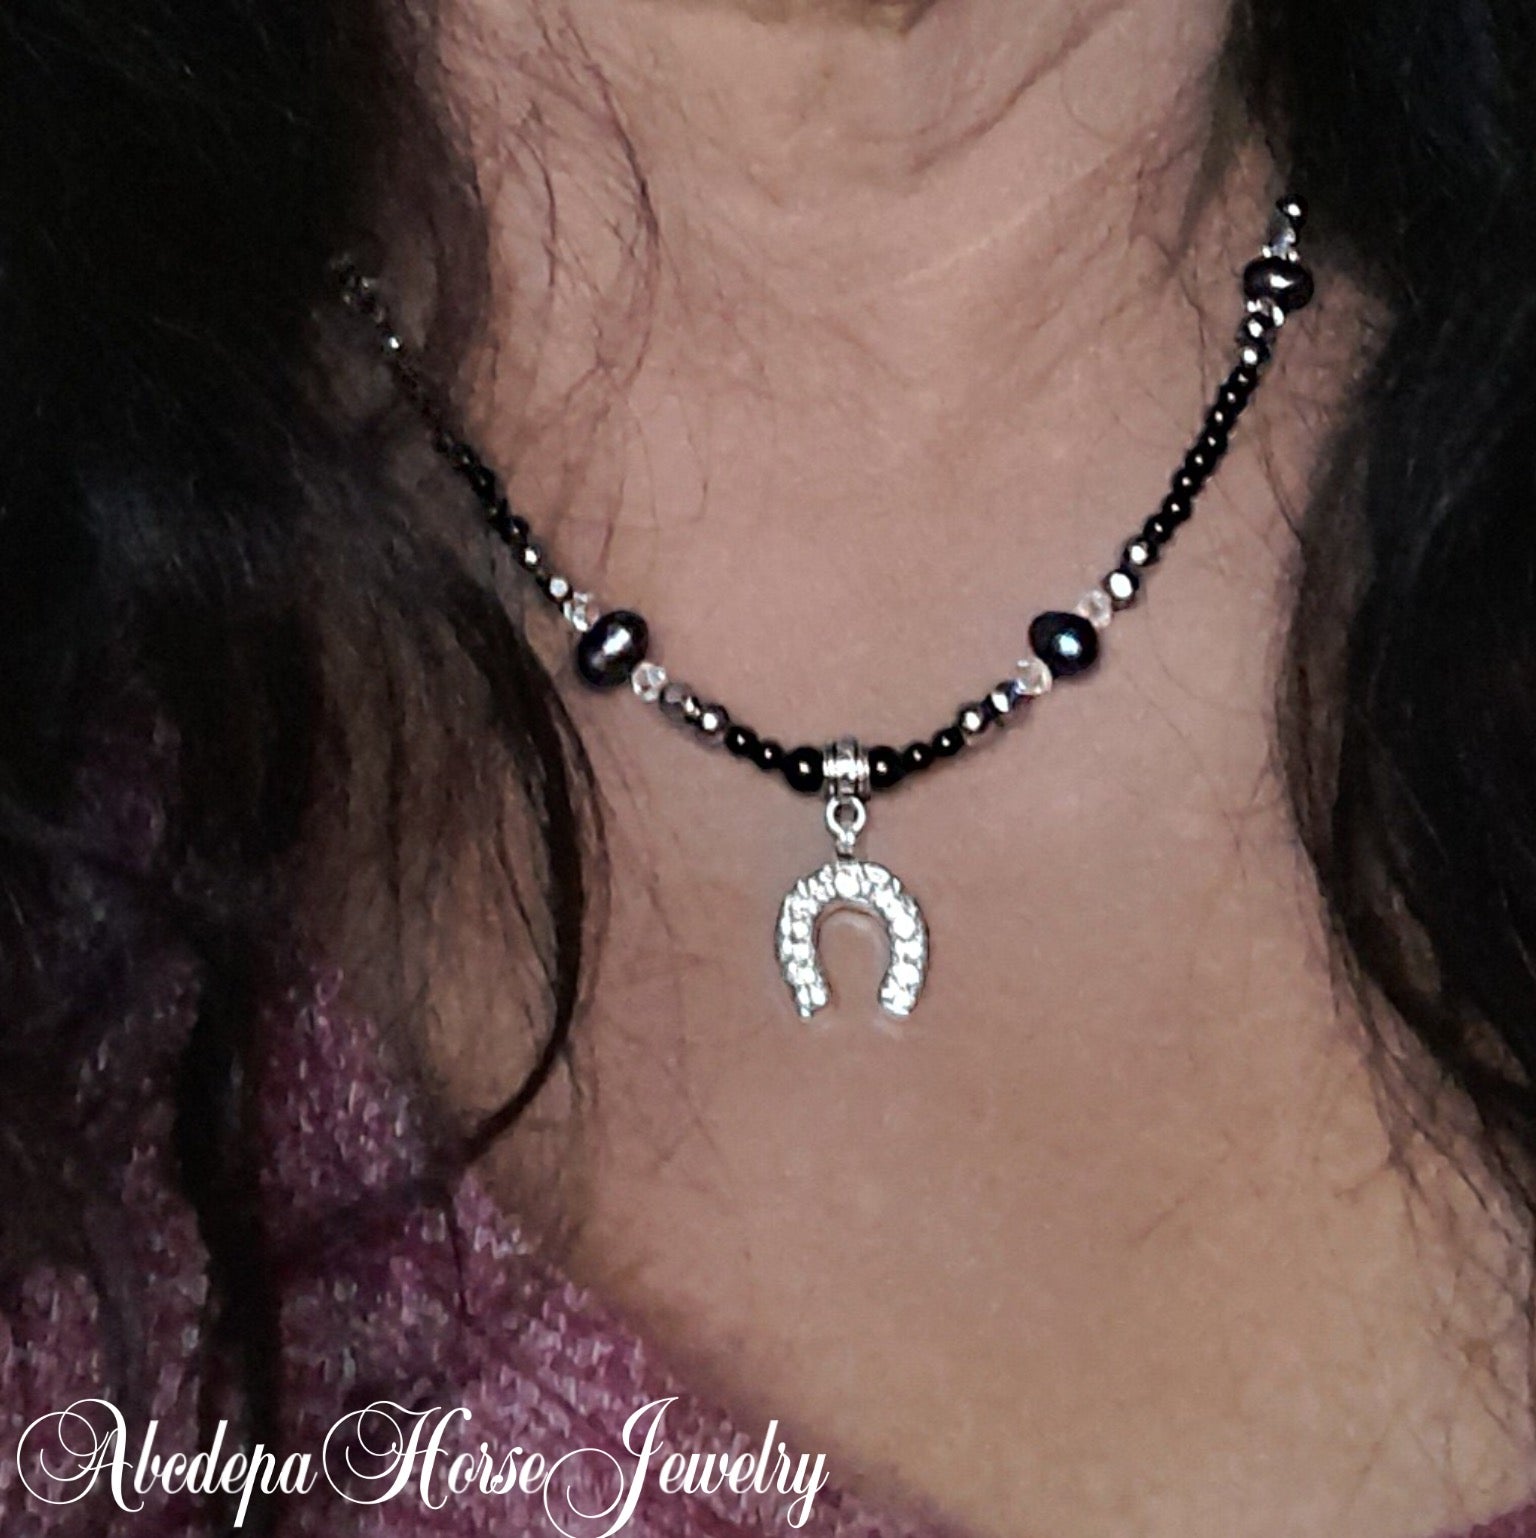 Black Tahitan Pearls with Crystals and Black Beaded Horseshoe Necklace